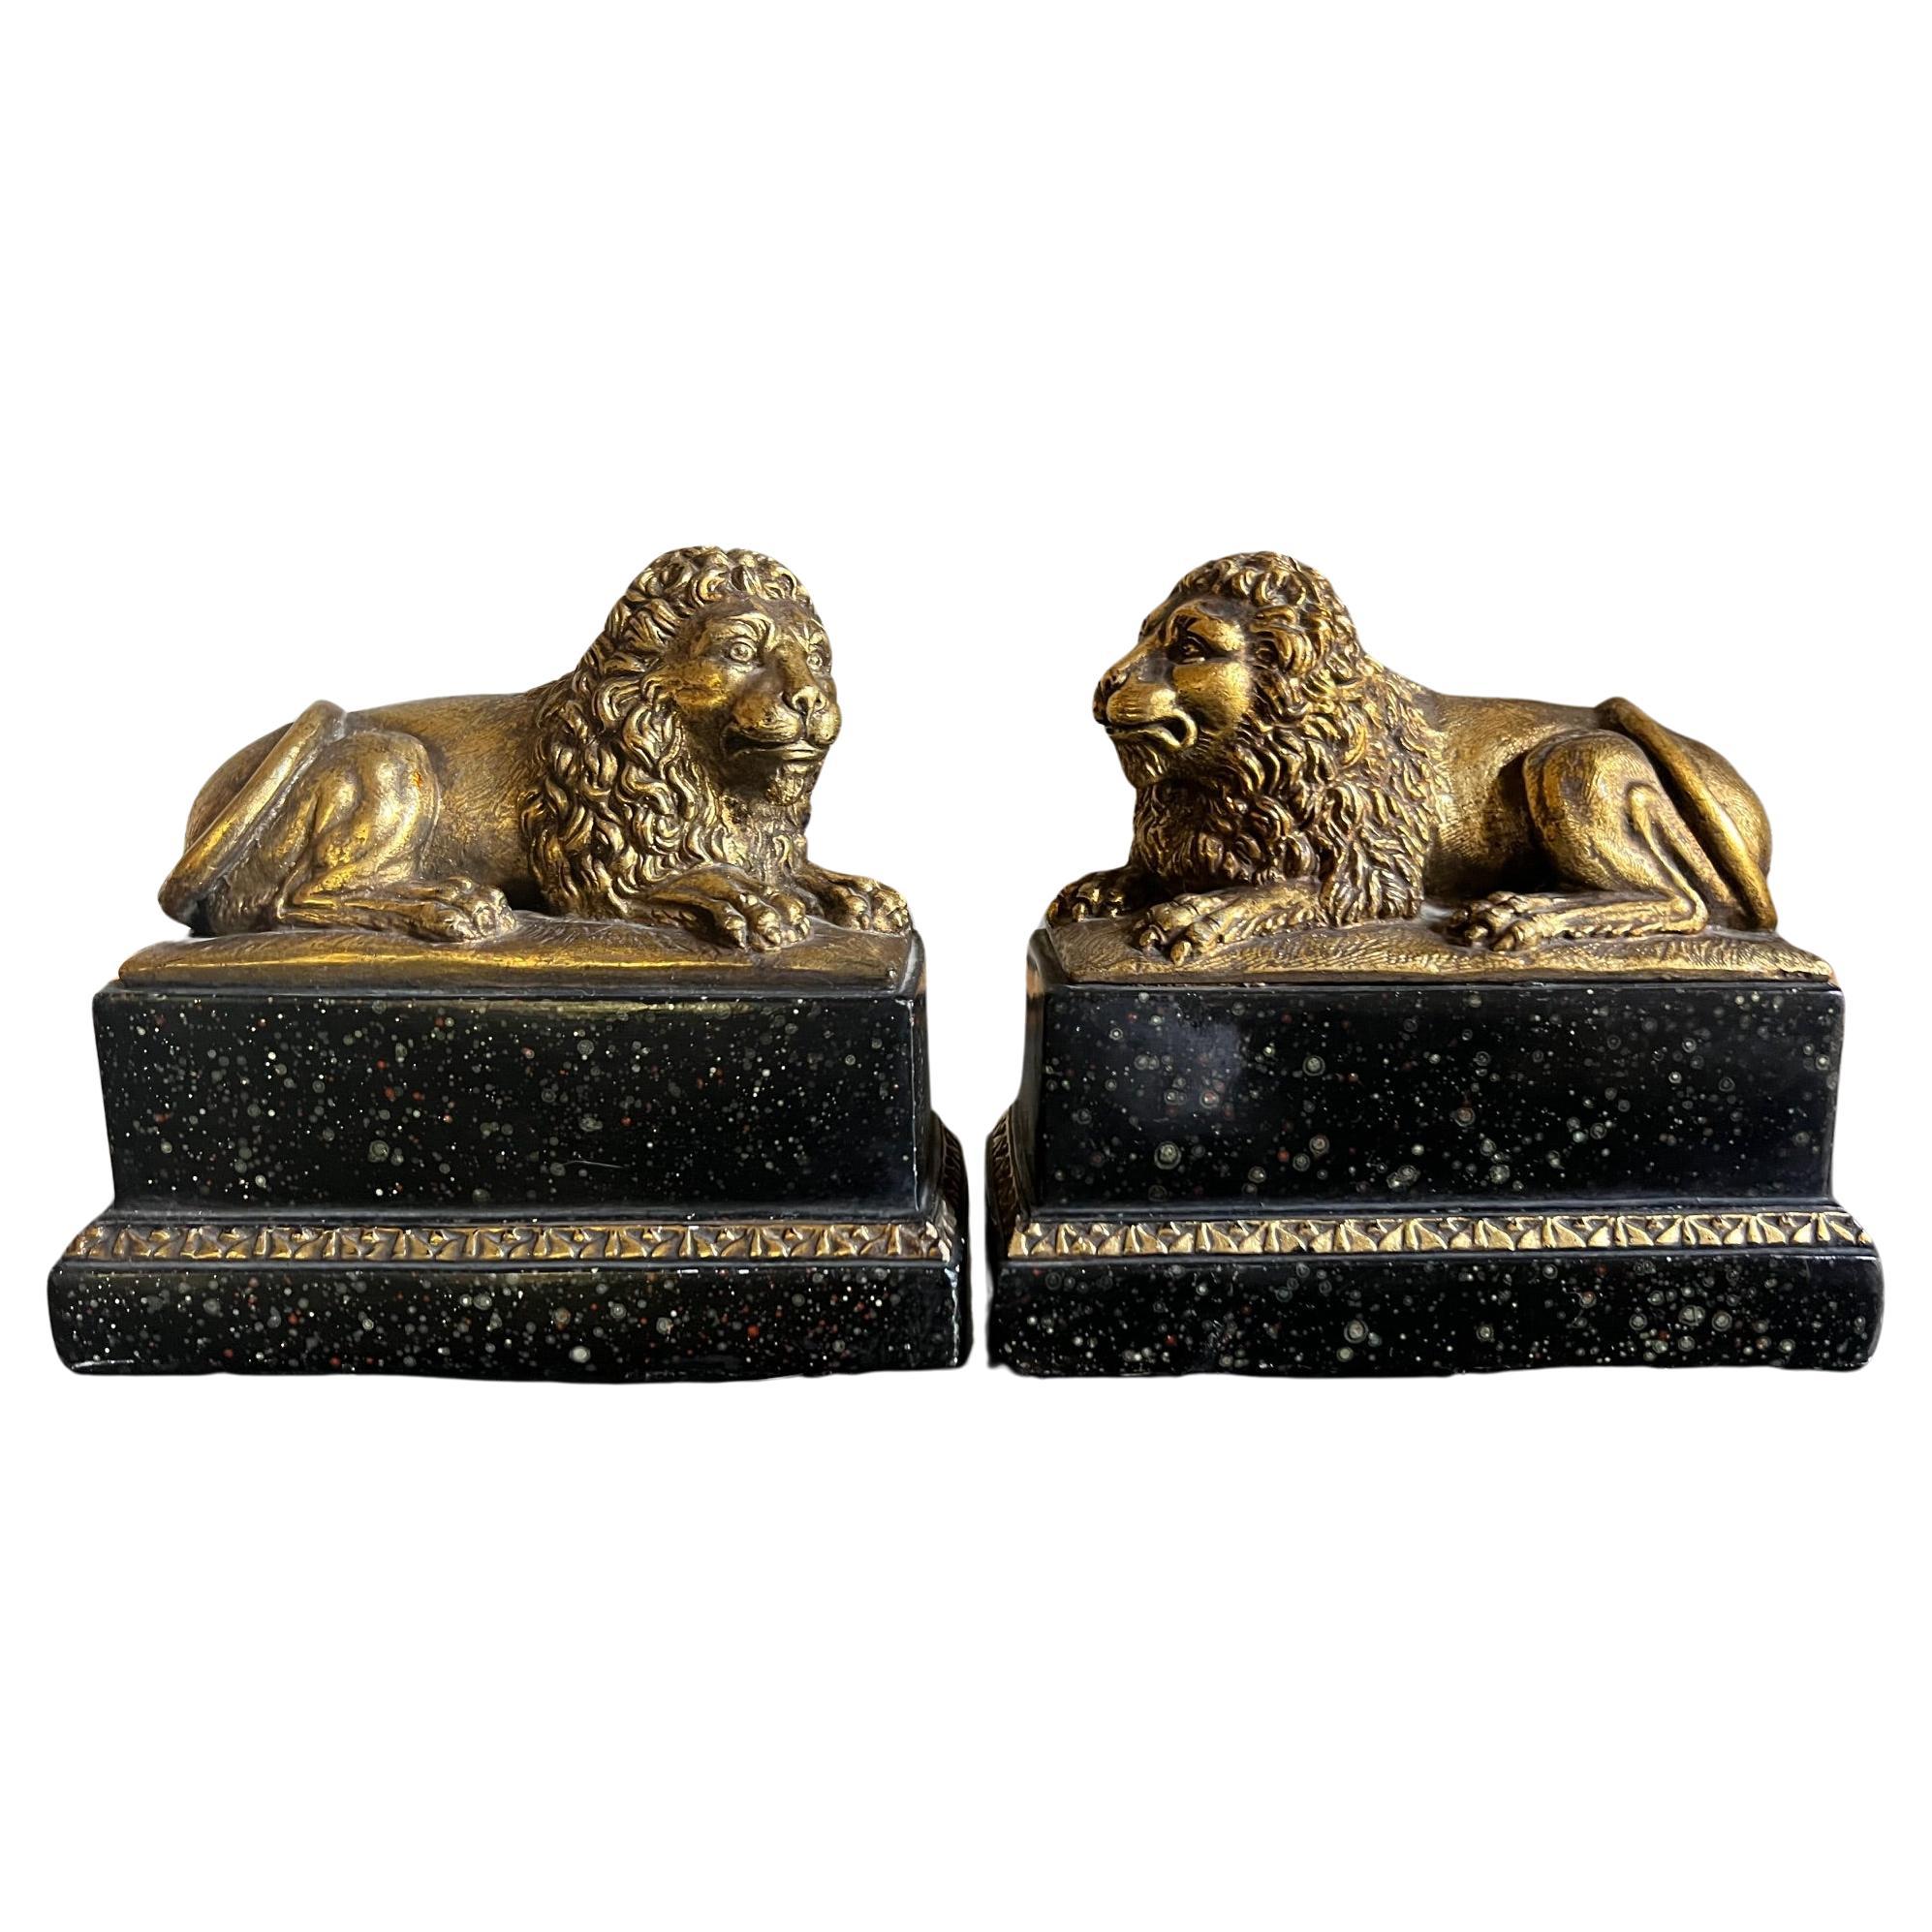  Vintage Italian Recumbent Lion Bookends by Borghese, c. 1960's